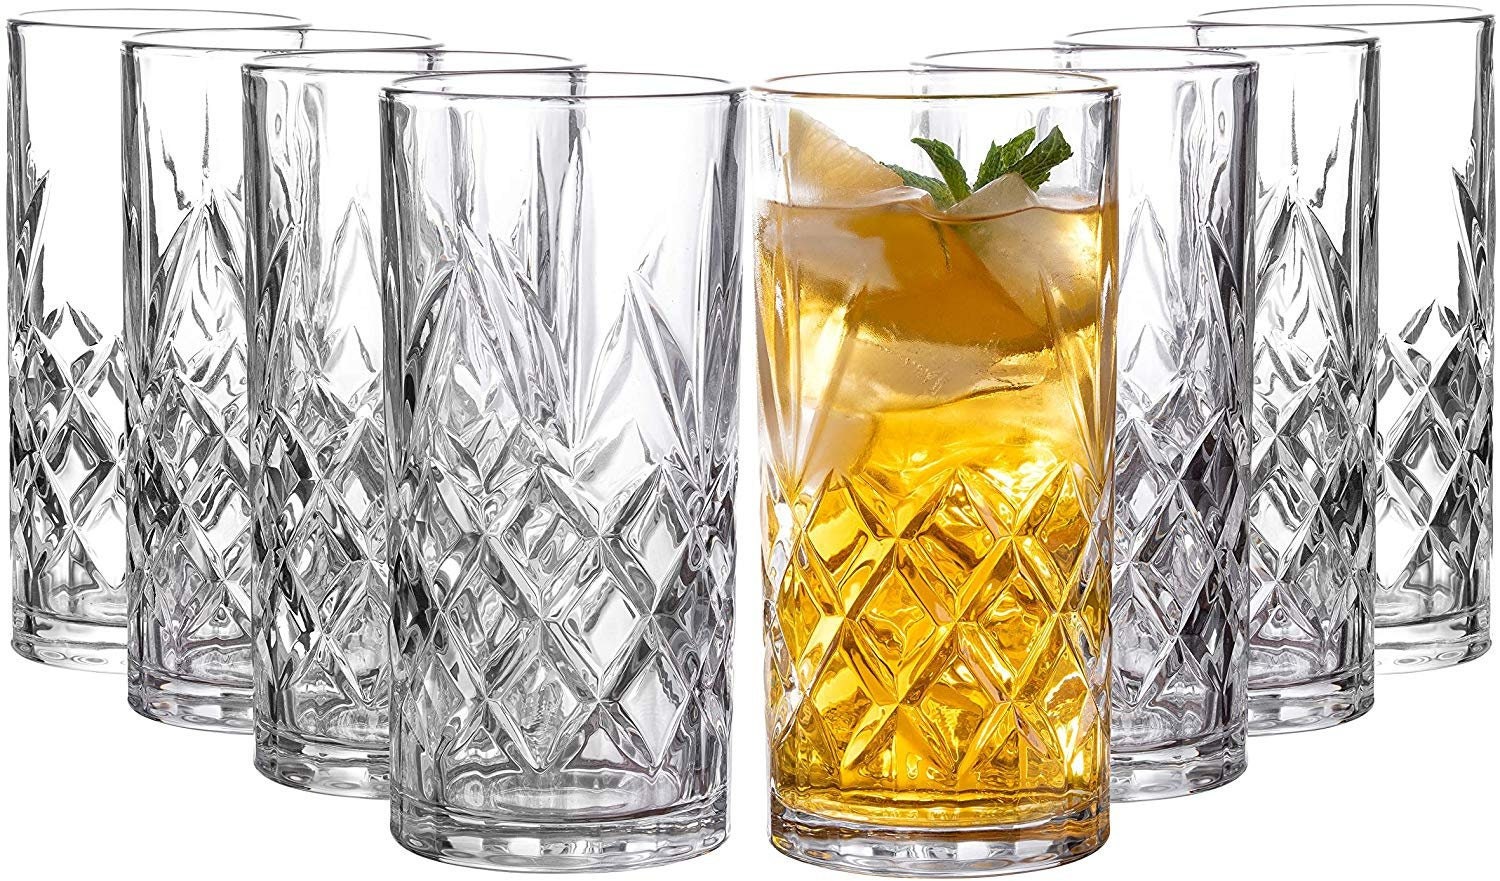 Drinking Glasses Tumbler Light Blue Set of 8, for Water,Cocktail,Juice,Beer,Iced Coffee,Clear Blue Glassware for Kitchen,Thick & Heavy Glass Highball